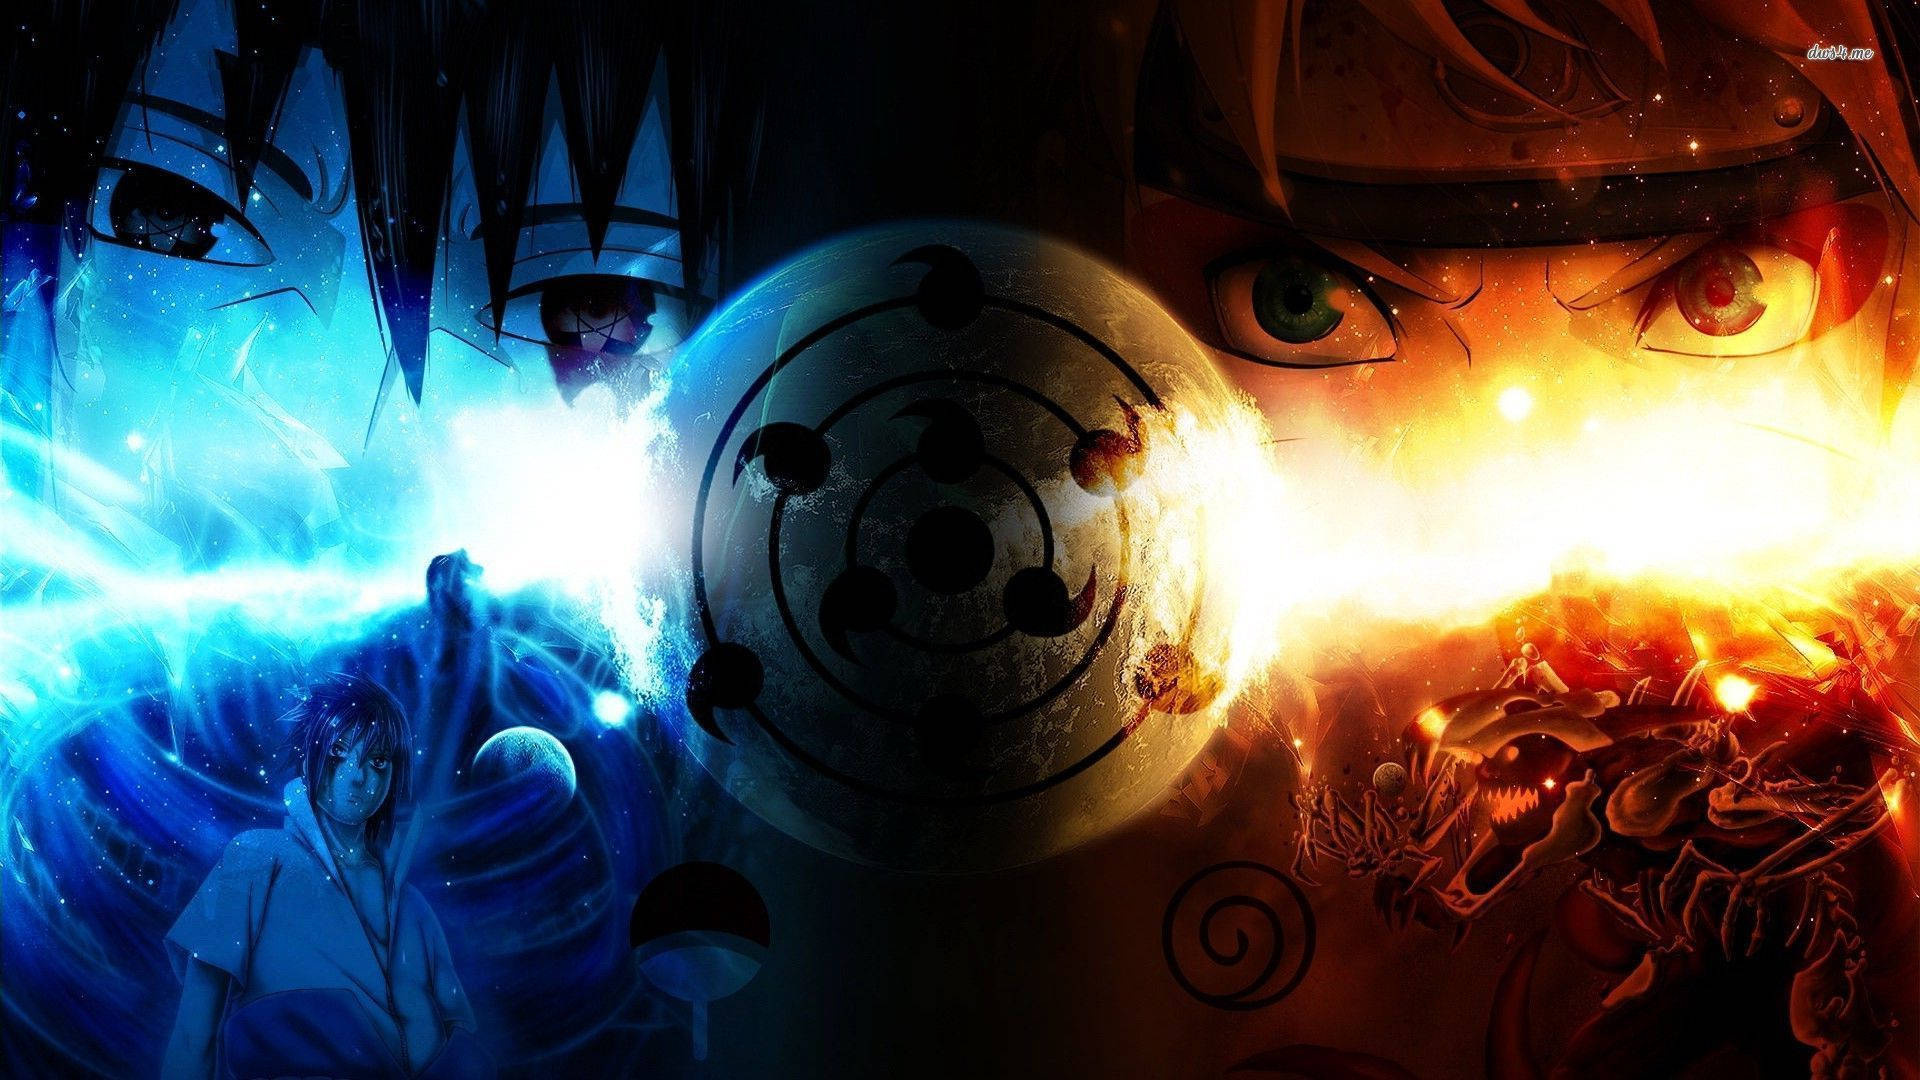 Naruto and Sasuke Battle it Out in Intense Rivalry Wallpaper